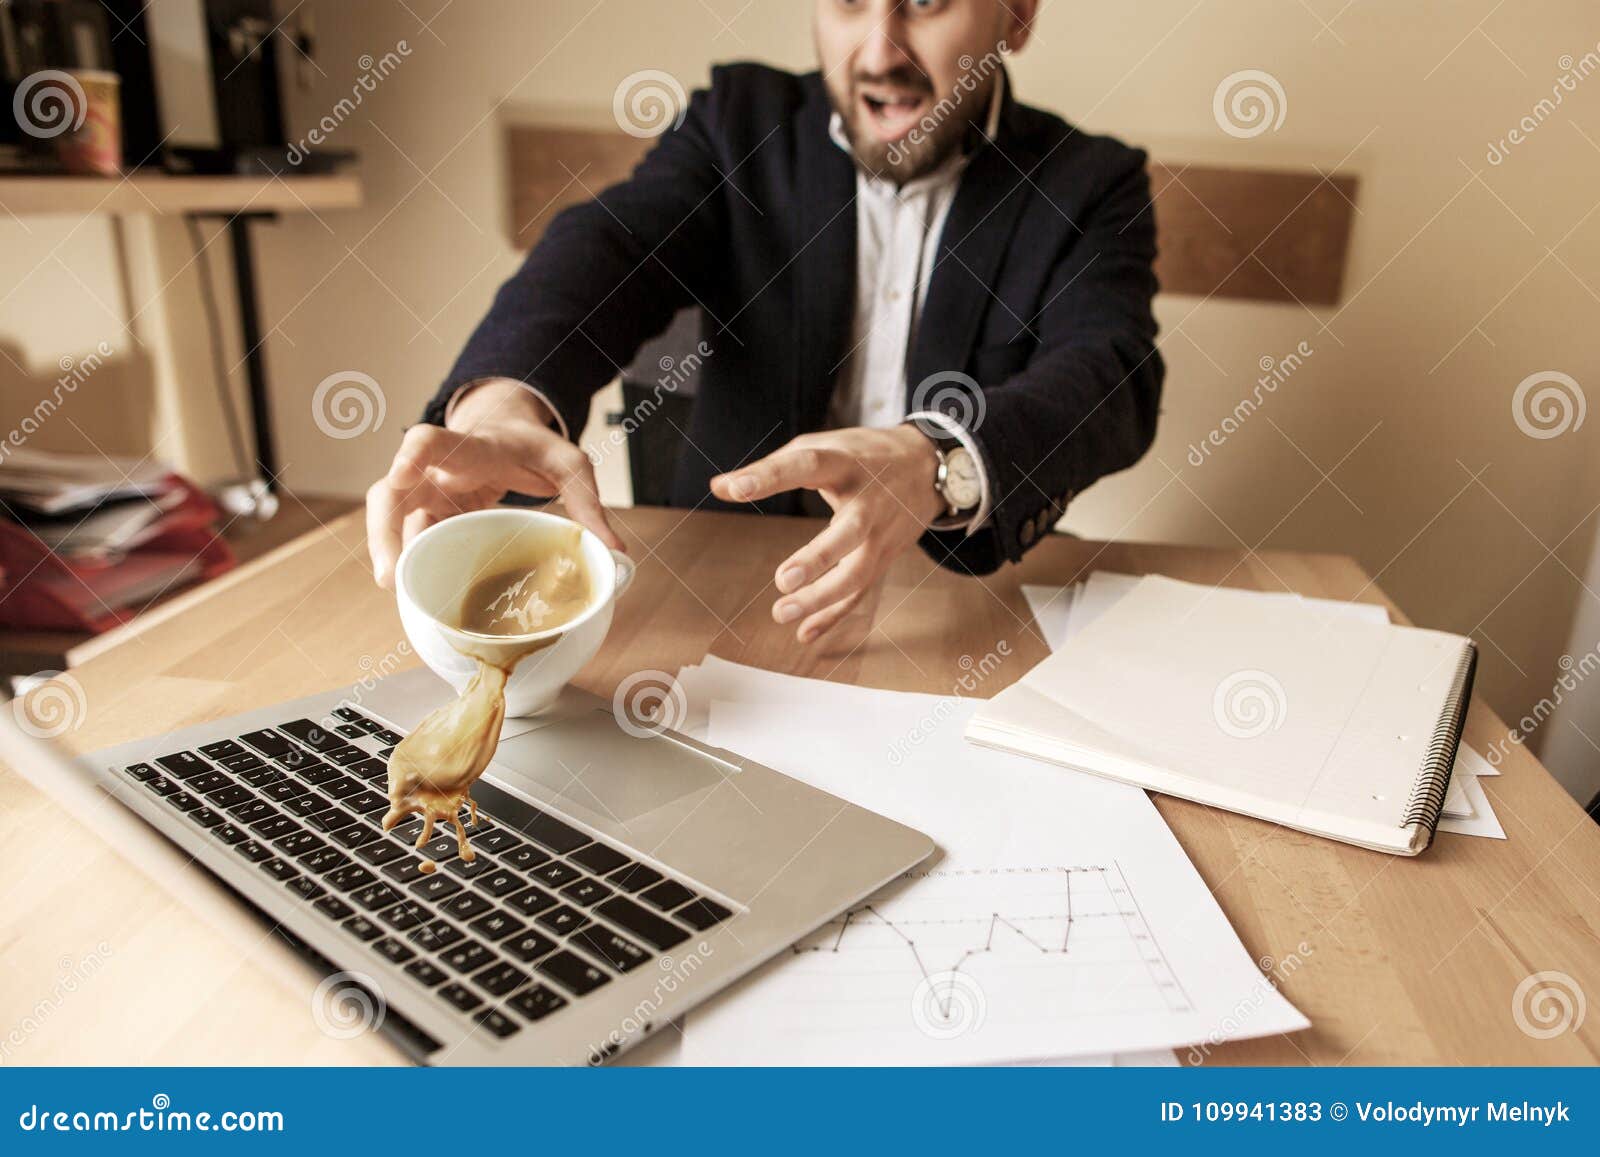 coffee in white cup spilling on the table in the morning working day at office table